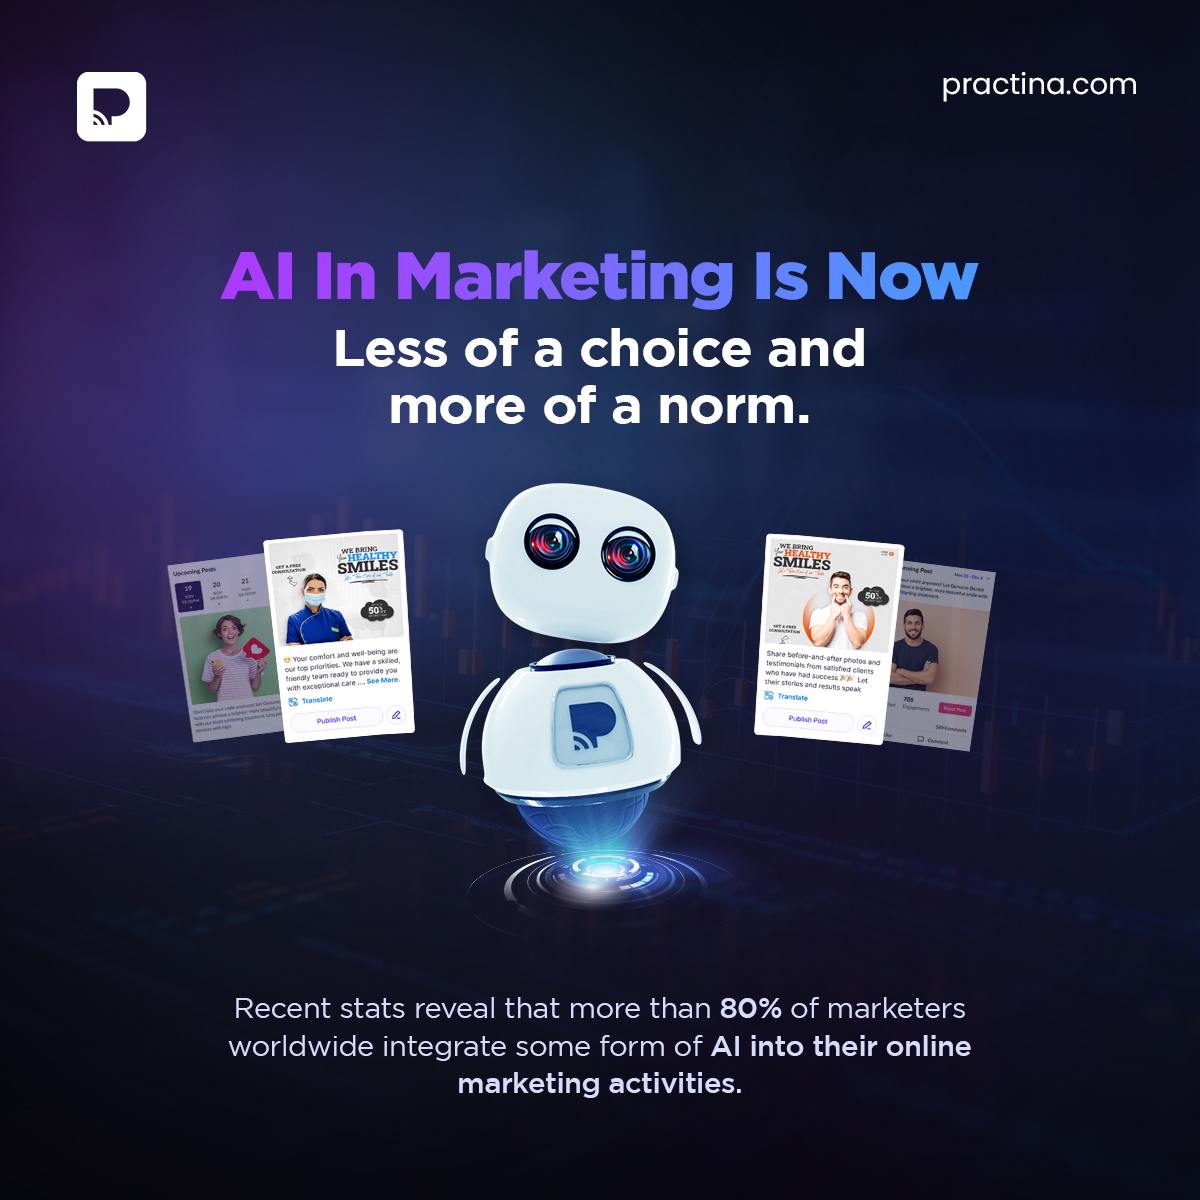 It's time to make the most of AI in your marketing efforts because chances are, your competitors already are doing so. It's become the norm. But how? The answer is Practina AI - yes, it has all the features you need to keep your efforts on par with the new norm!